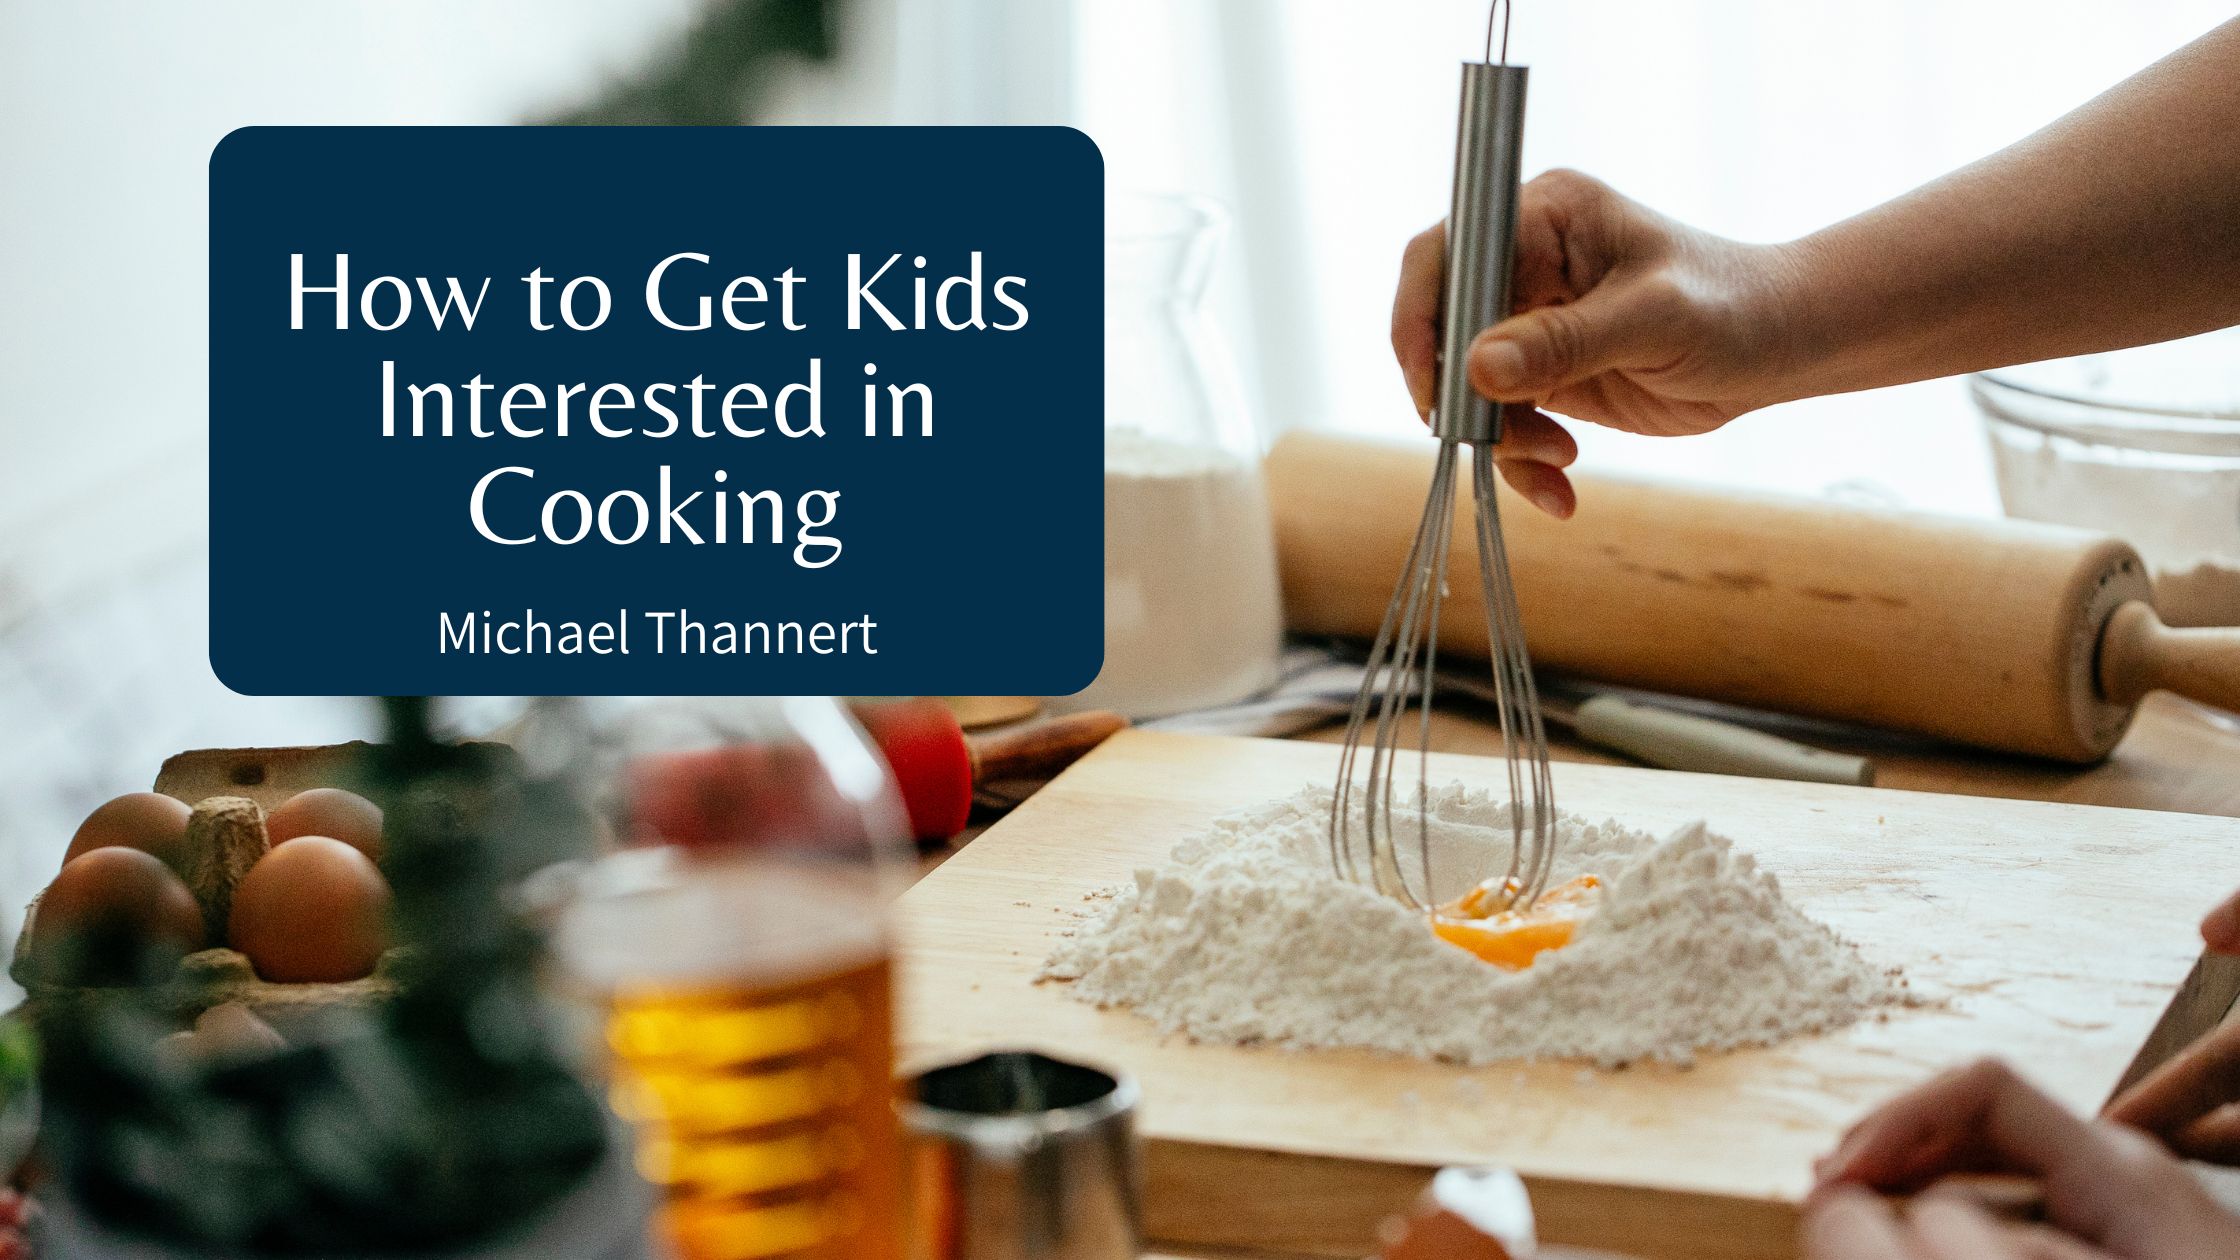 How to Get Kids Interested in Cooking